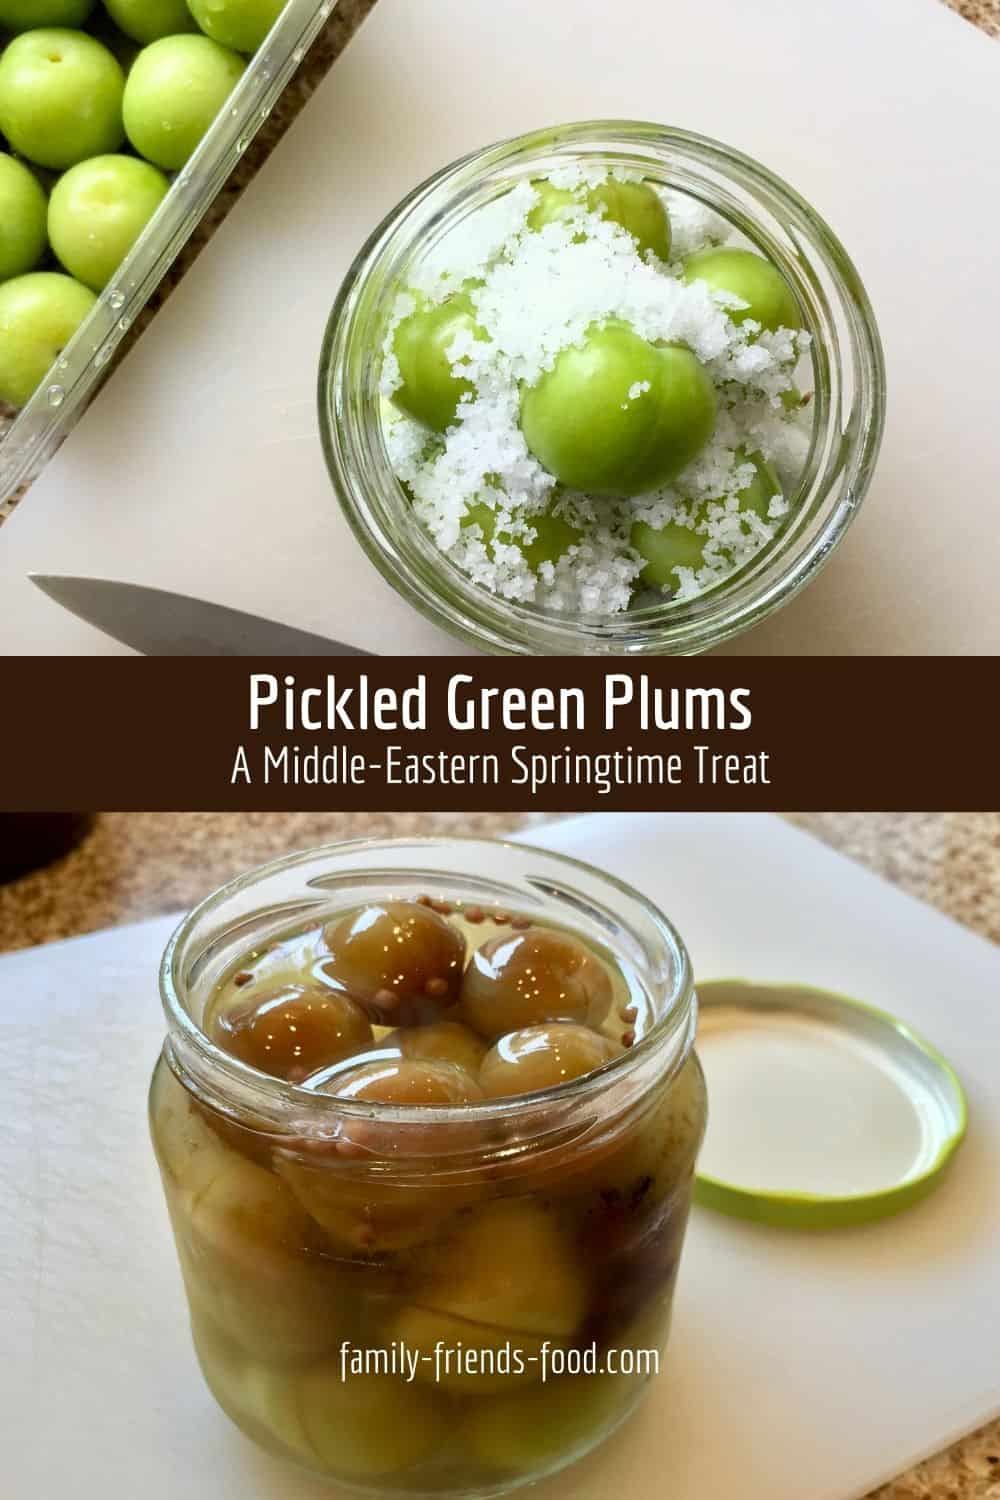 Pickled sour green plums - a Middle Eastern Springtime treat. 